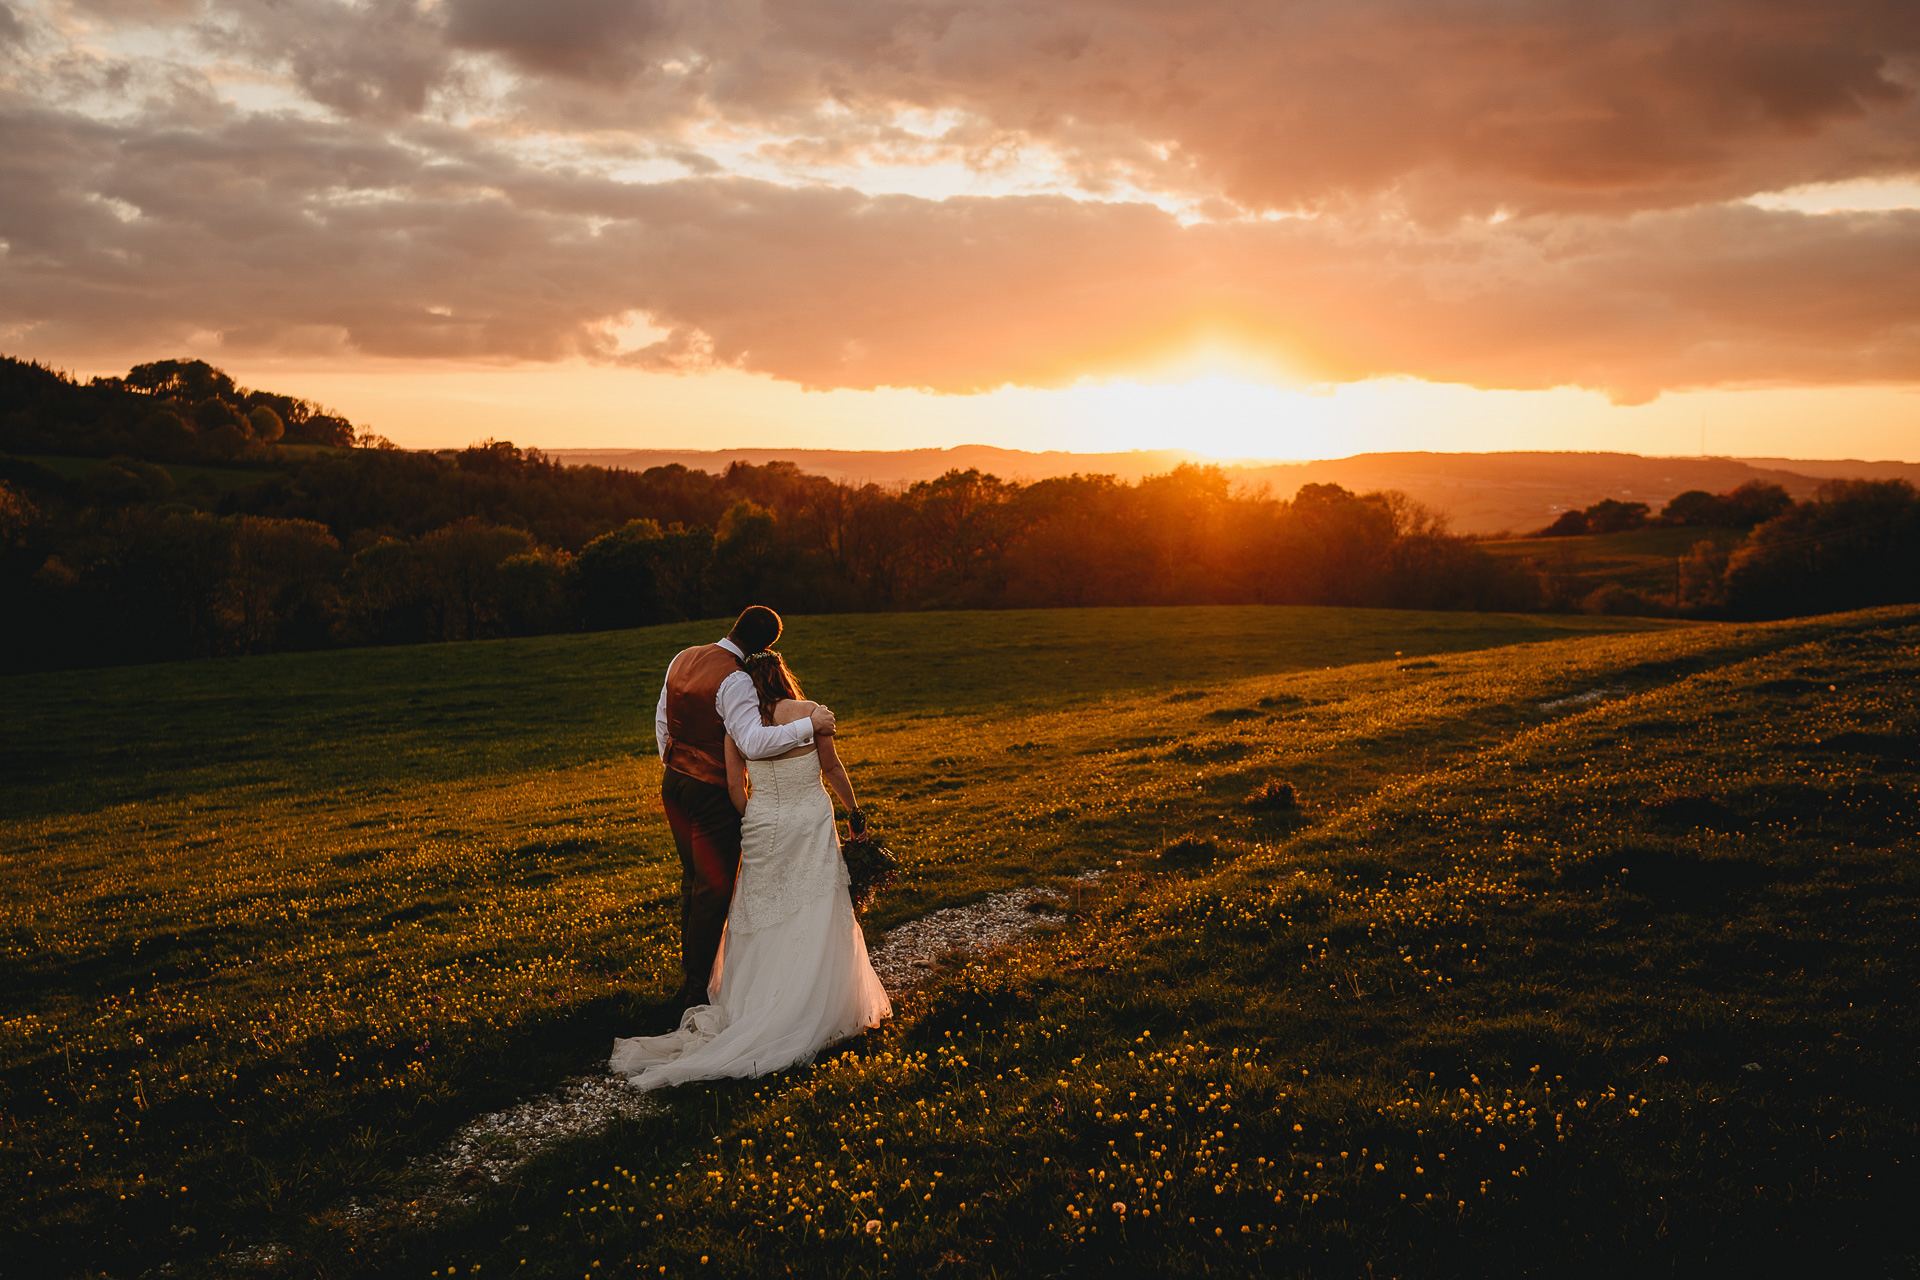 A bride and groom standing together and watching a sunset over countryside